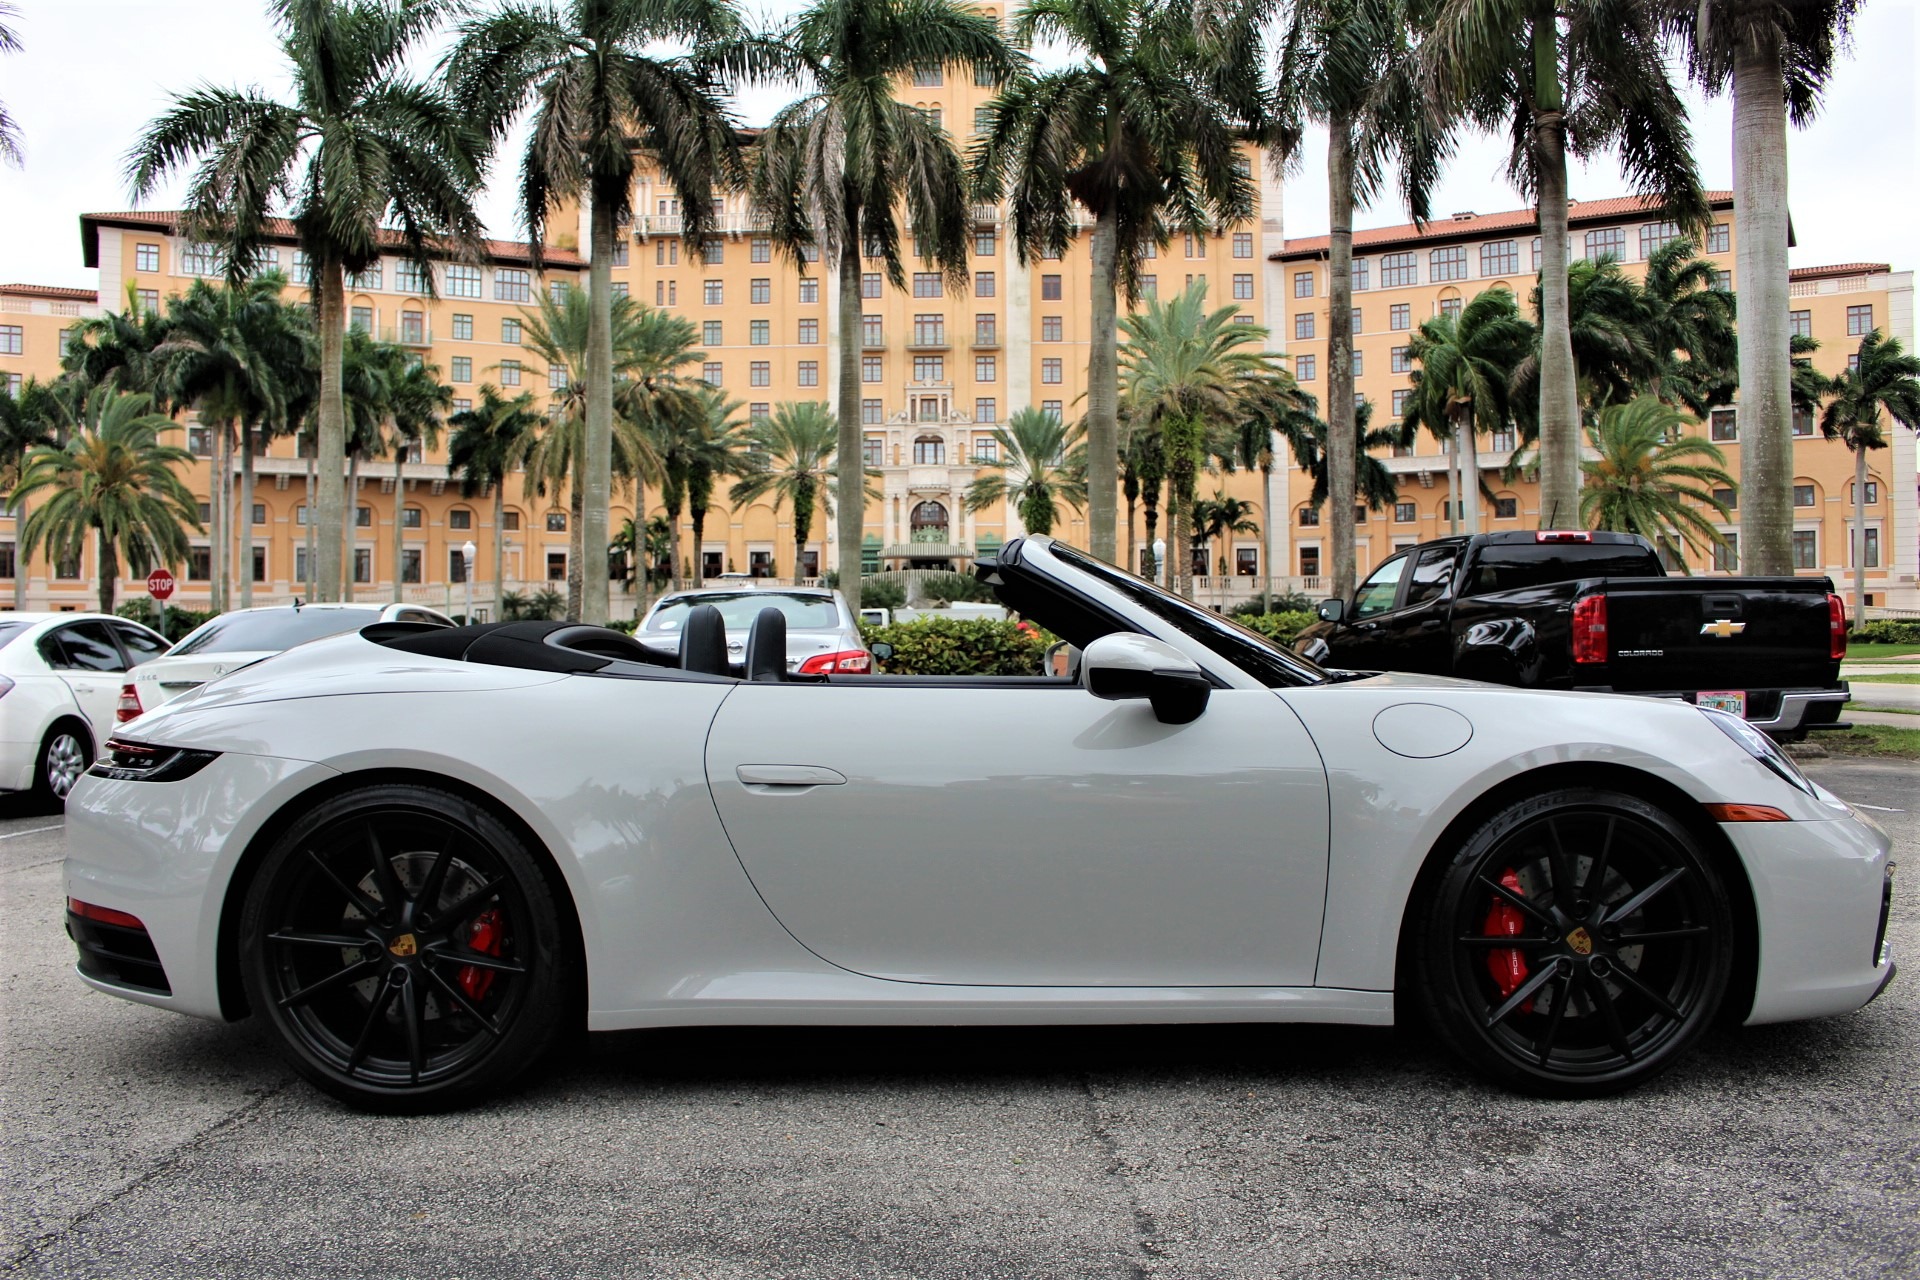 Used 2020 Porsche 911 Carrera S for sale Sold at The Gables Sports Cars in Miami FL 33146 2